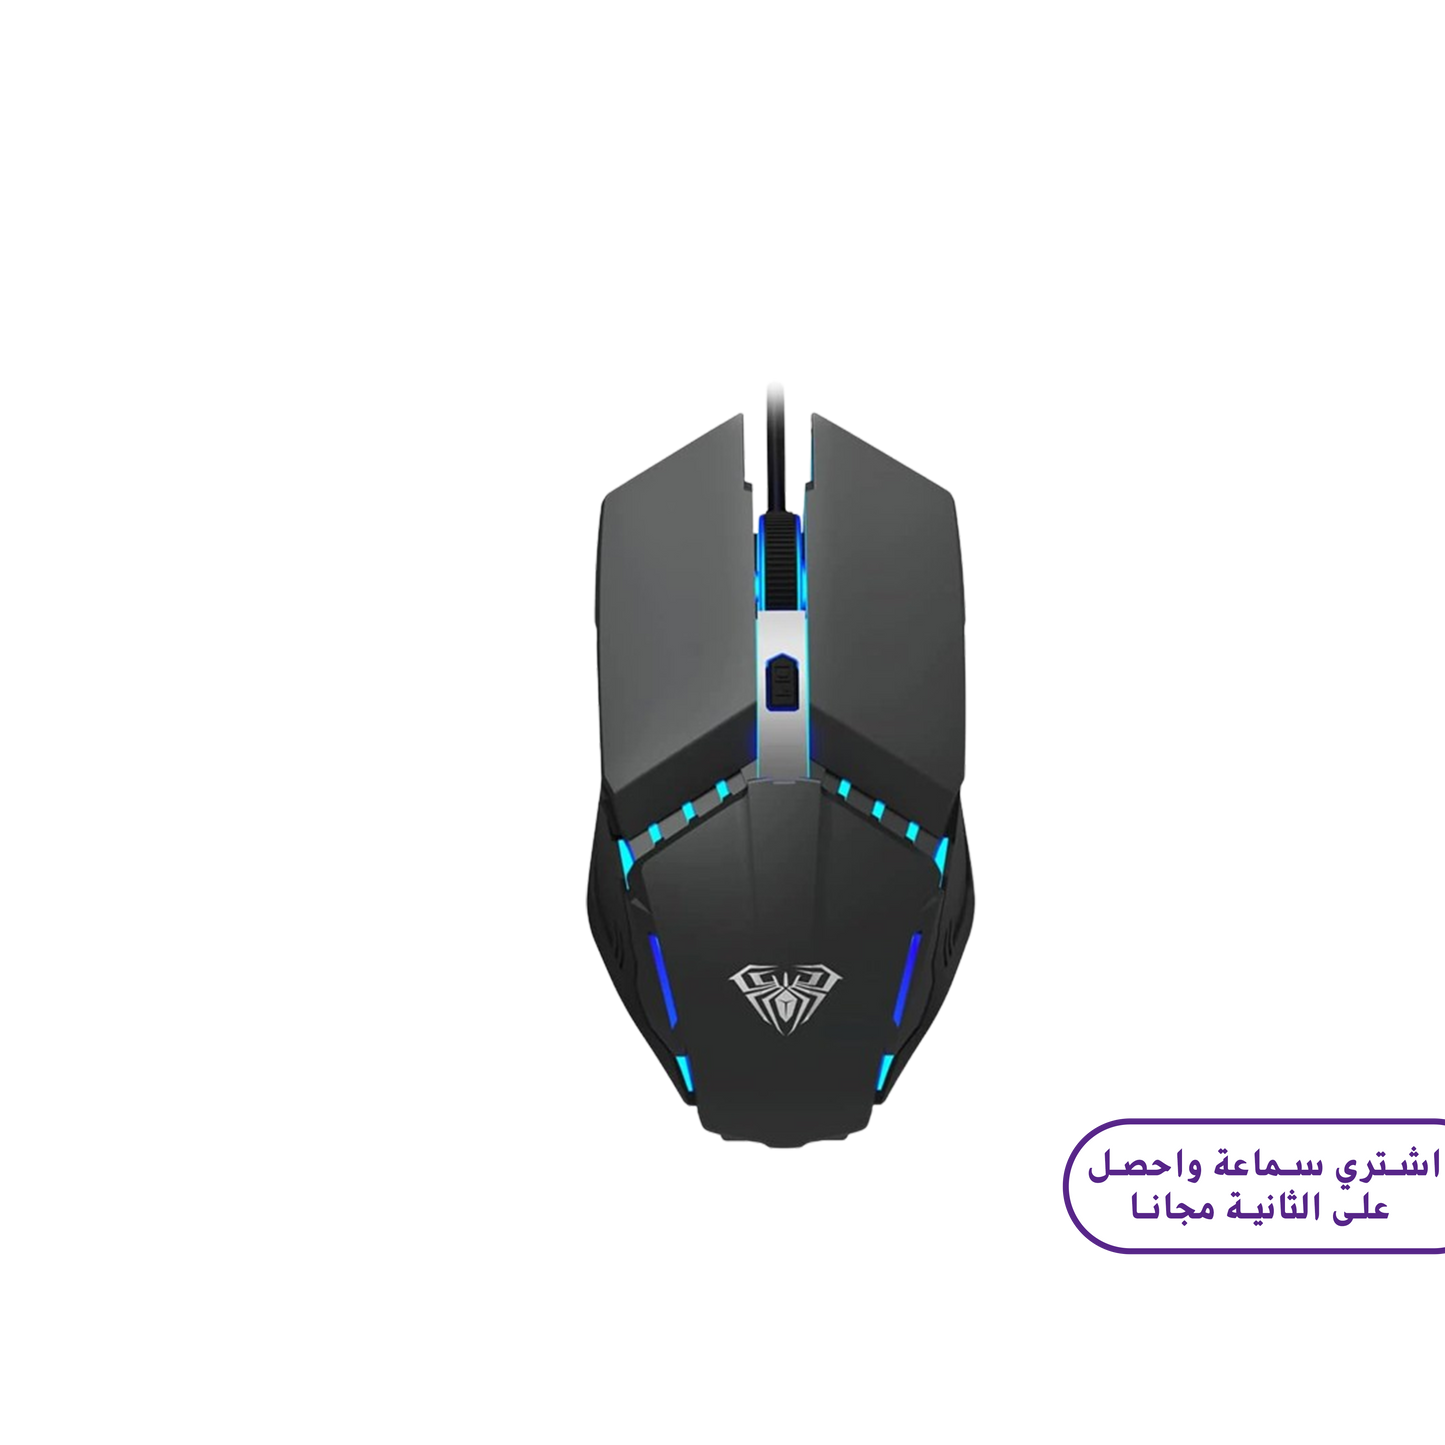 AULA S31 Gaming Mouse